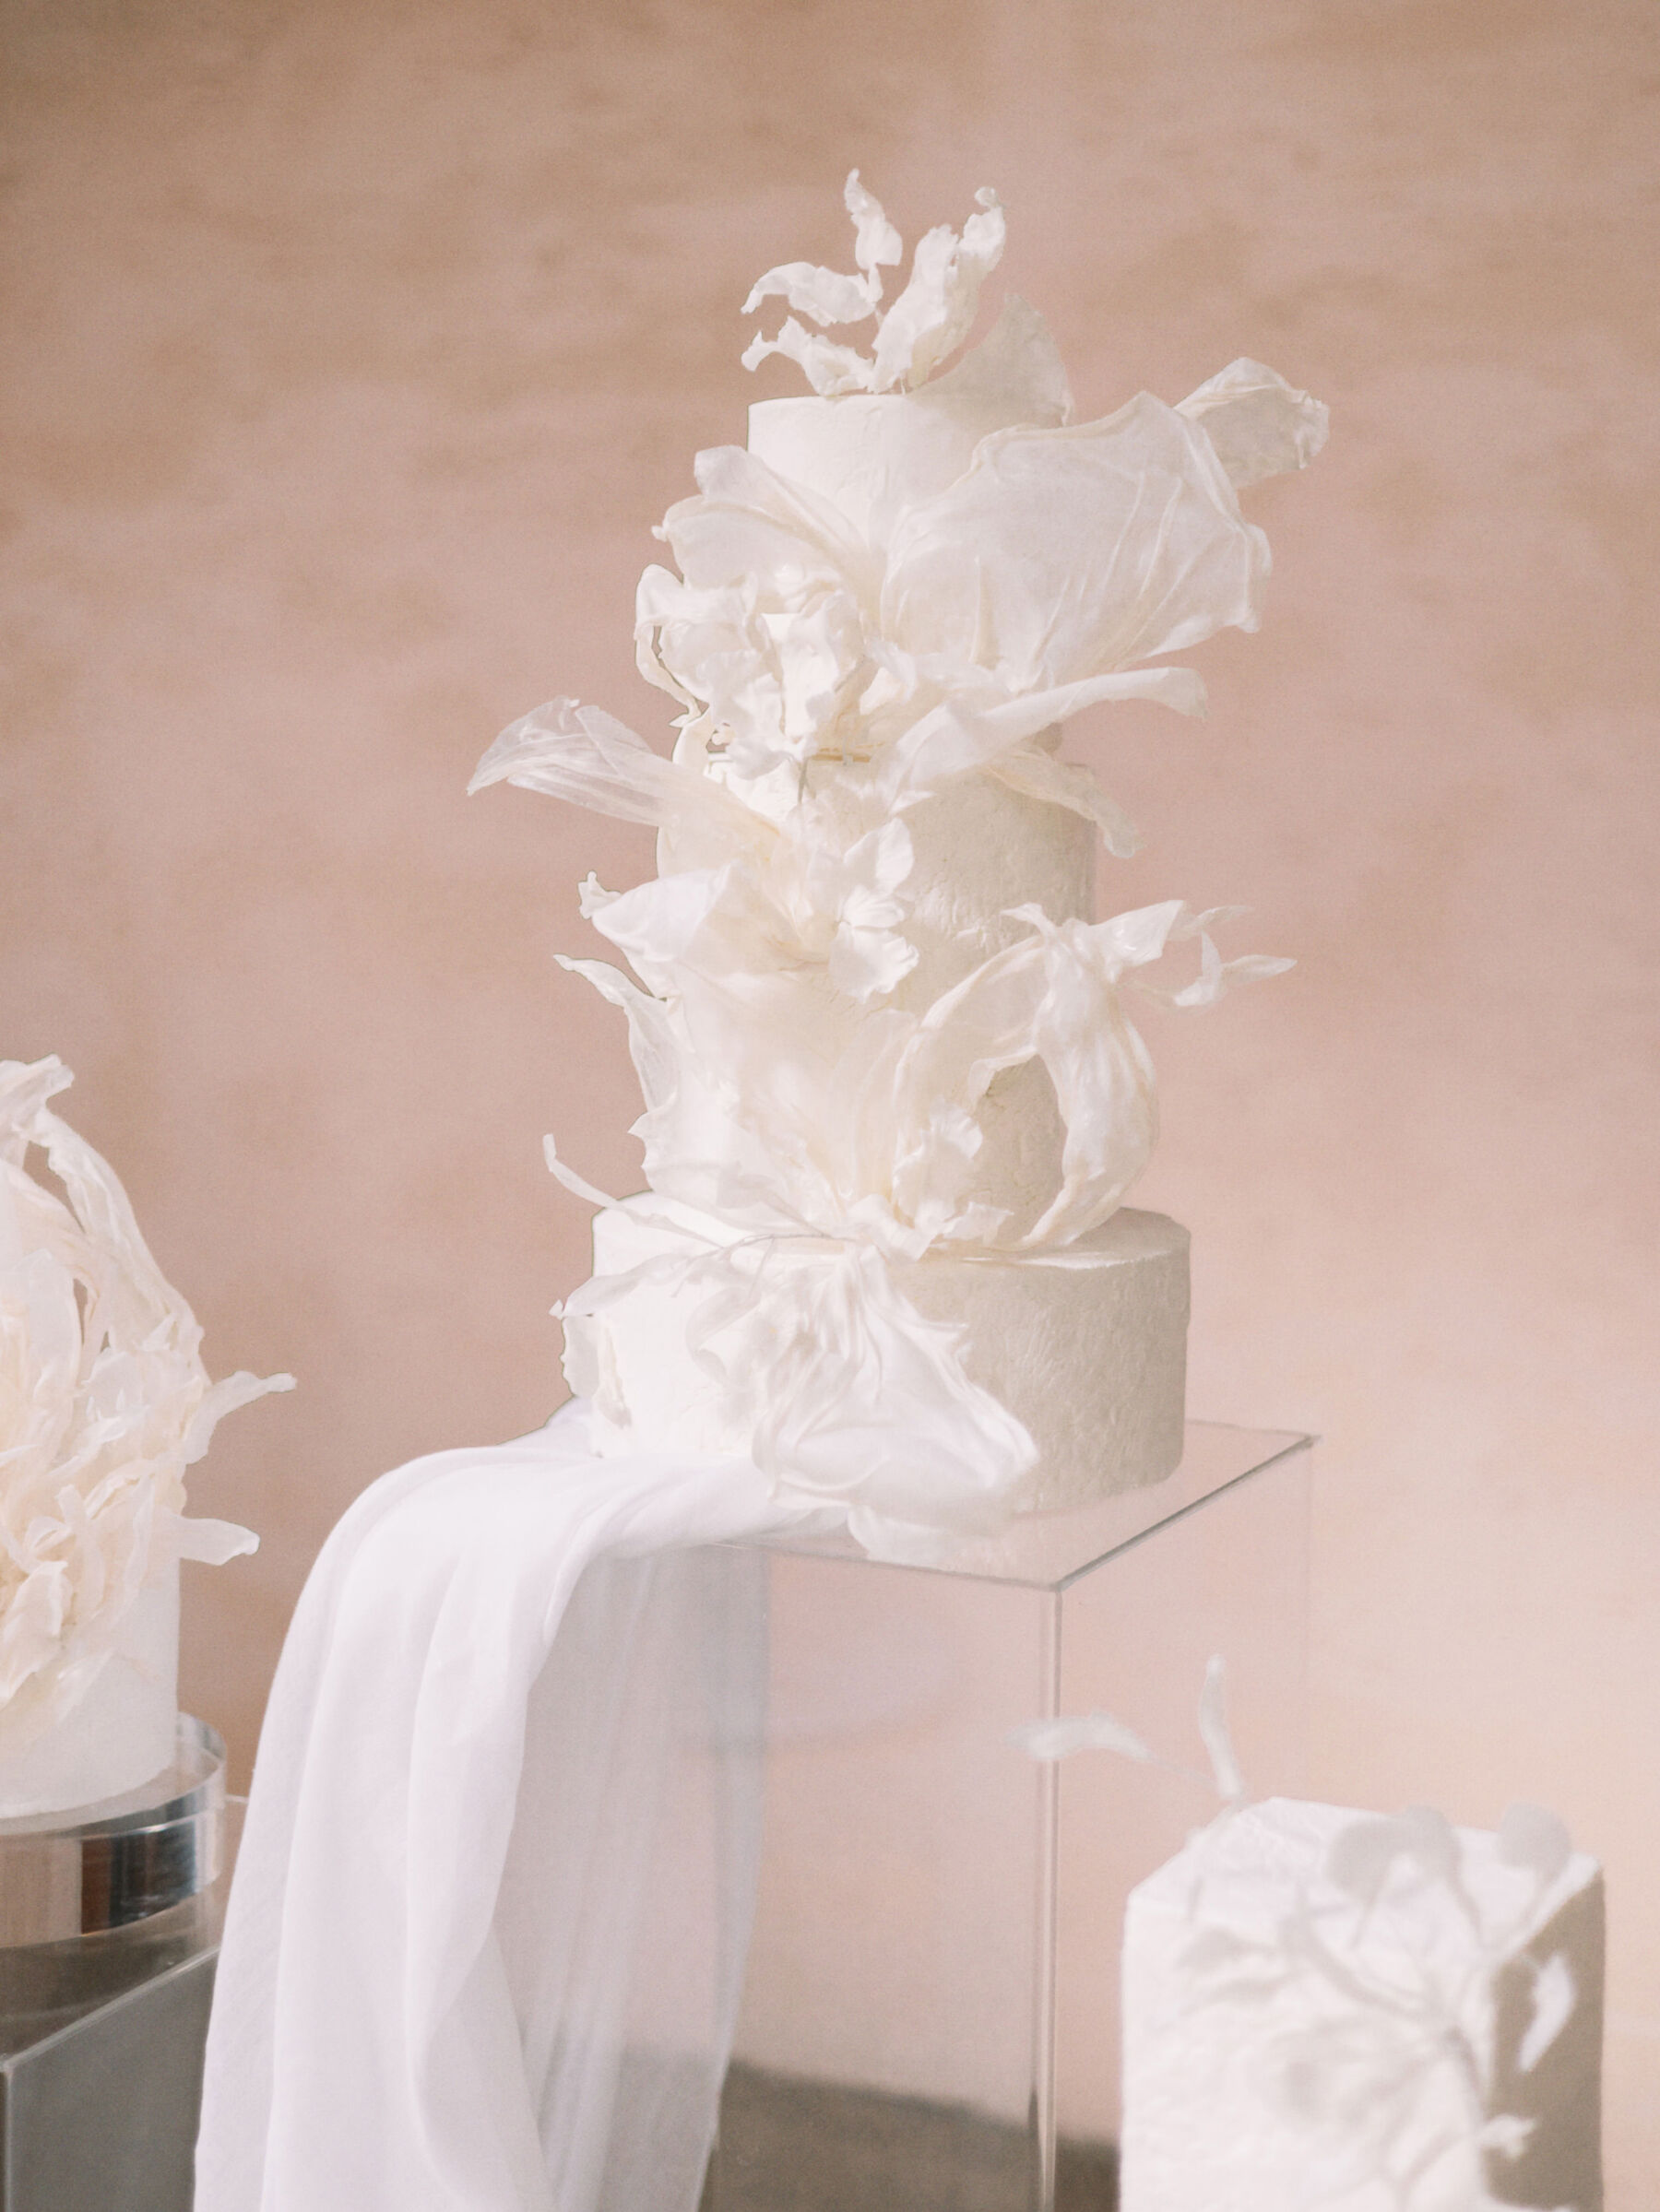 Dramatic 4 tier wedding cake in the shape of falling fabric.